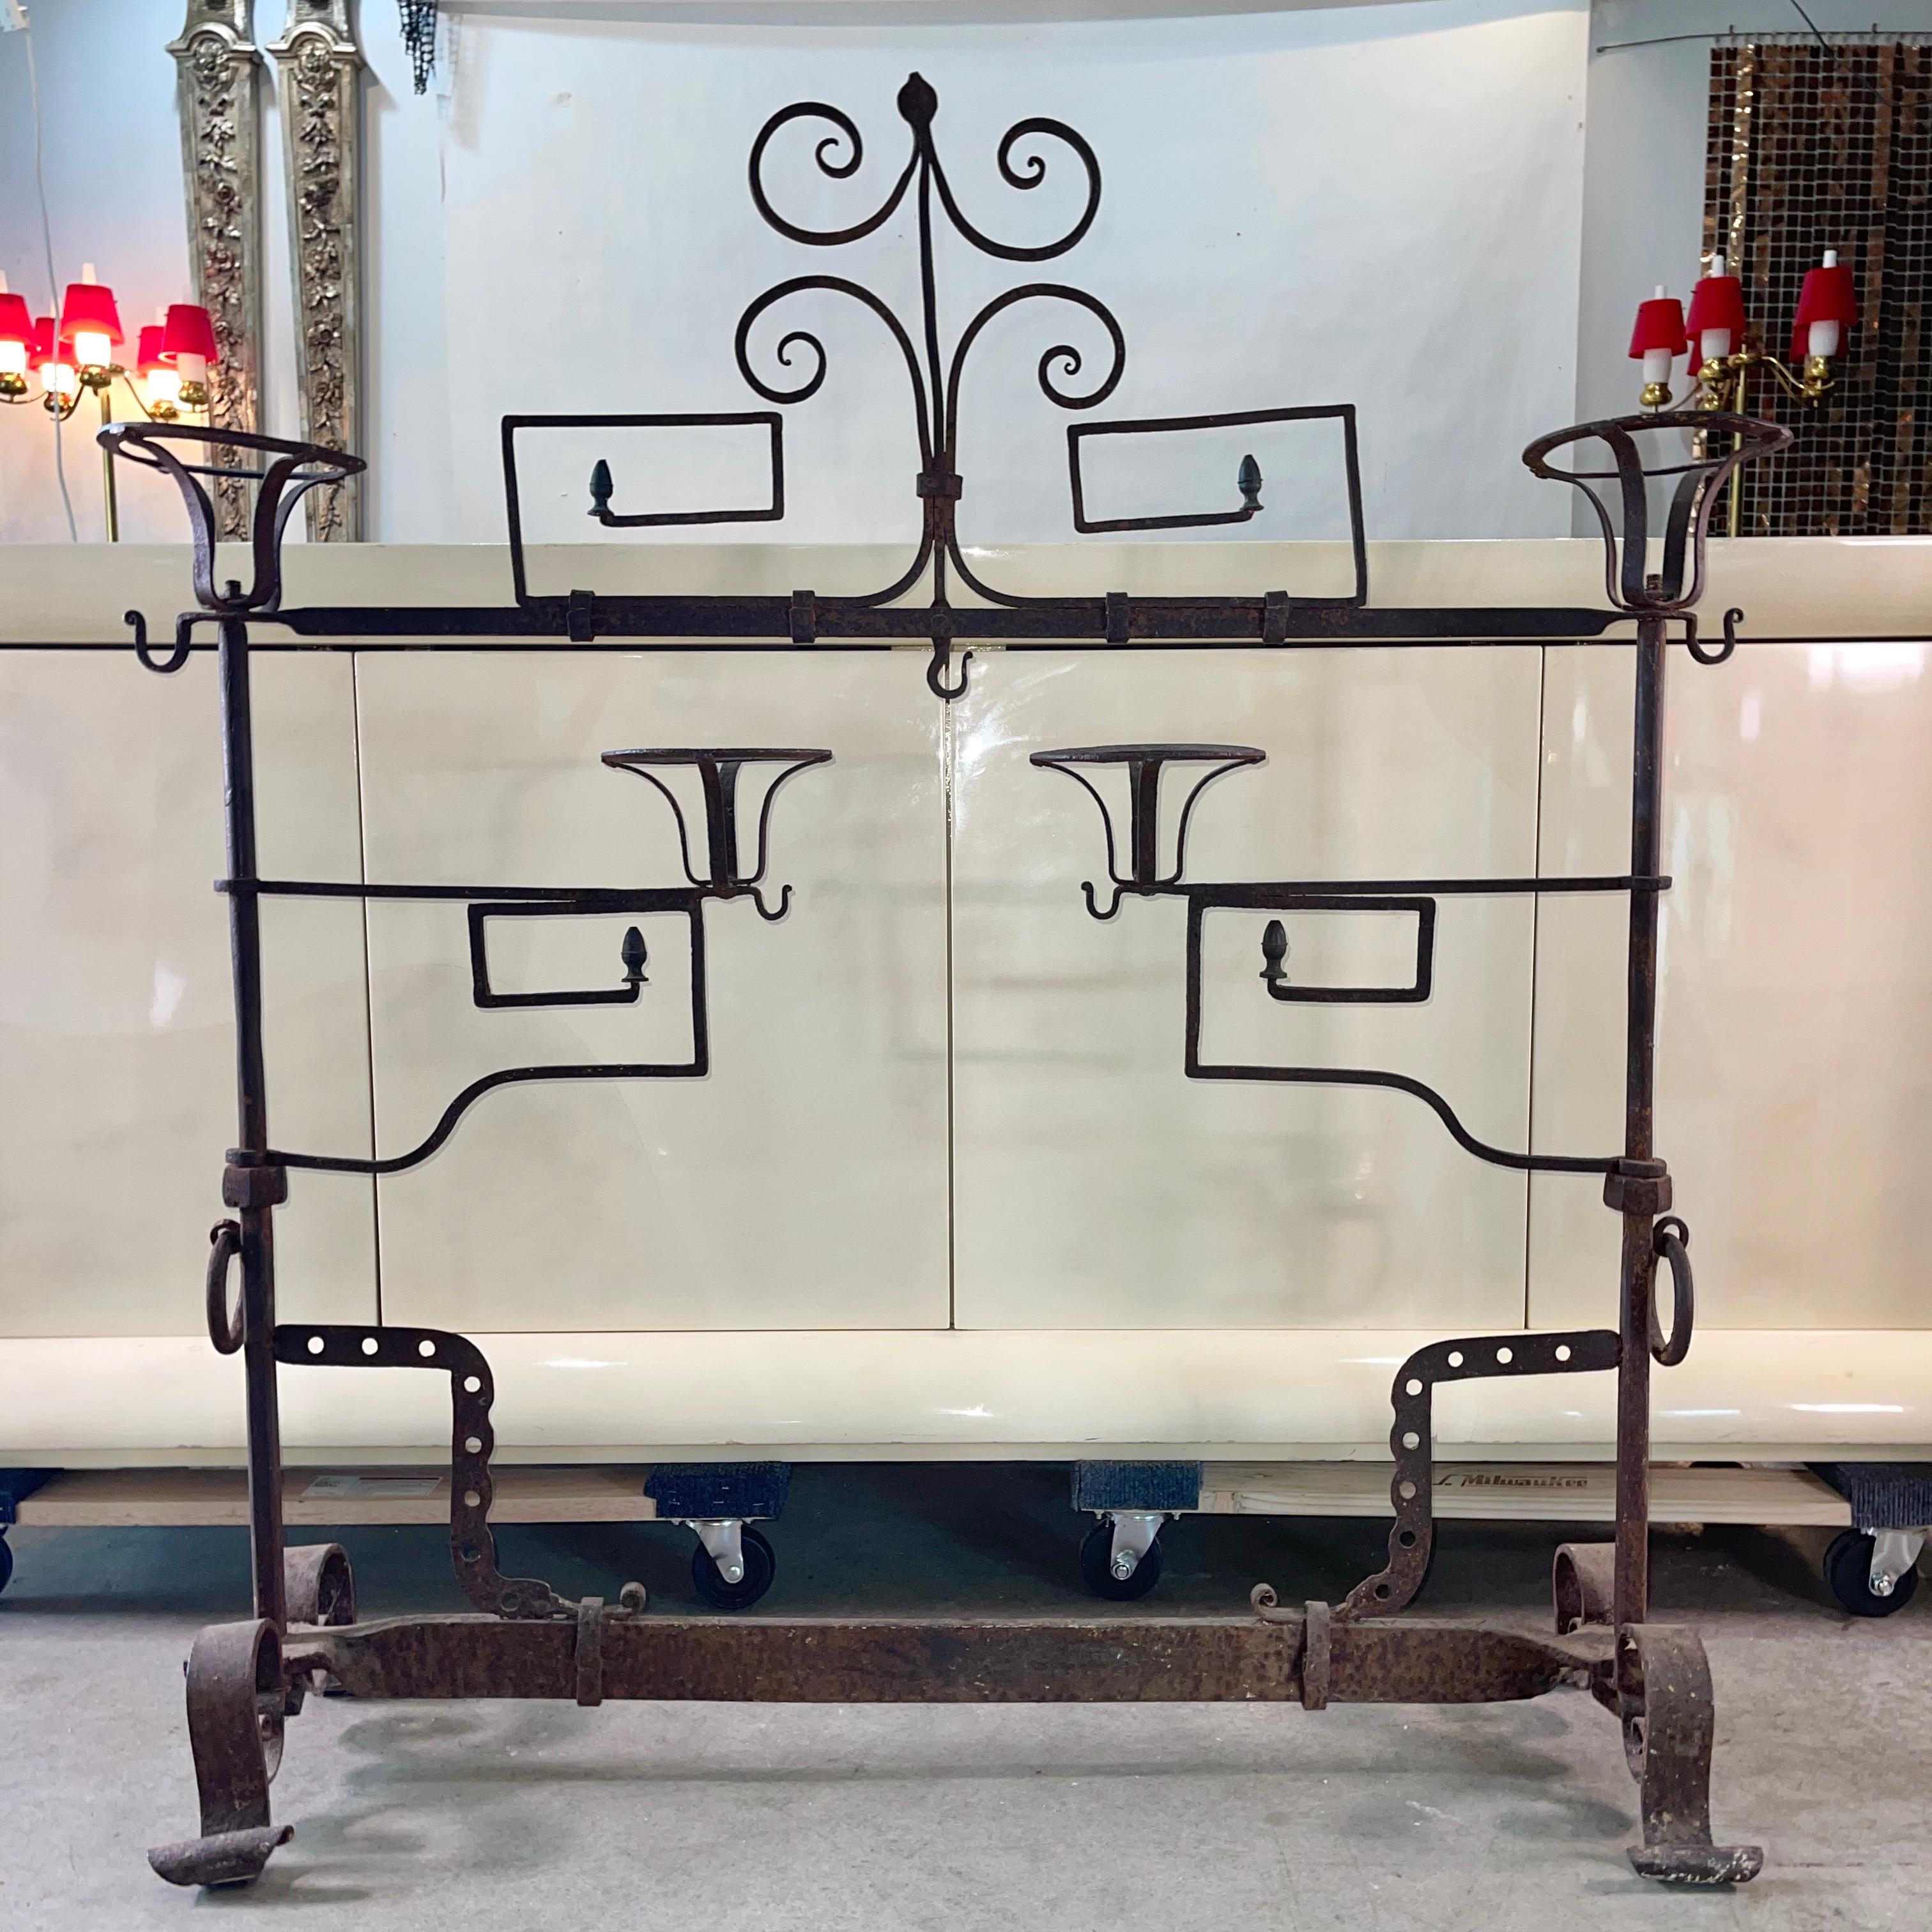 French 18th century fer forge lanier fireplace screen with two swing out arms and four baskets, leafy scroll decoration, rings and hooks for hanging utensils, standing on scrolled feet.

Reference: Les objets de la vie domestique: Ustensiles en